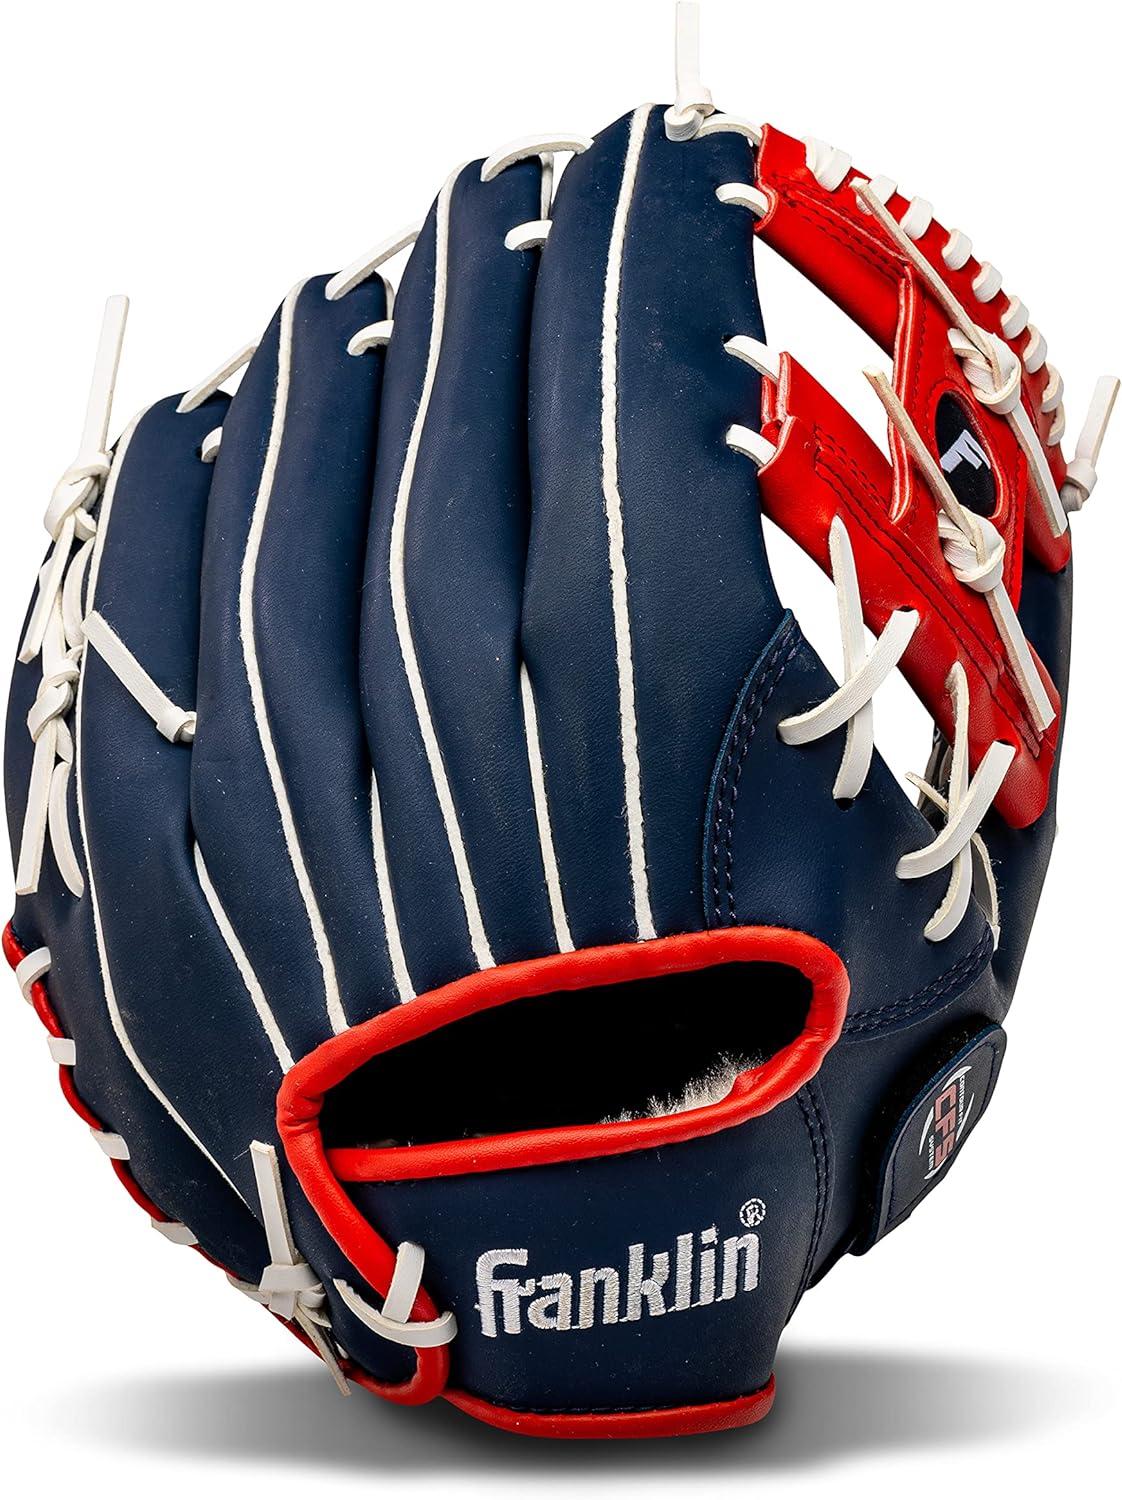 Franklin Sports Field Master Baseball & Softball Glove (11" - I Web, Right Hand Throw): Red, White, Blue $14.95 or Black $16.40 + Free Shipping w/ Prime or on $35+